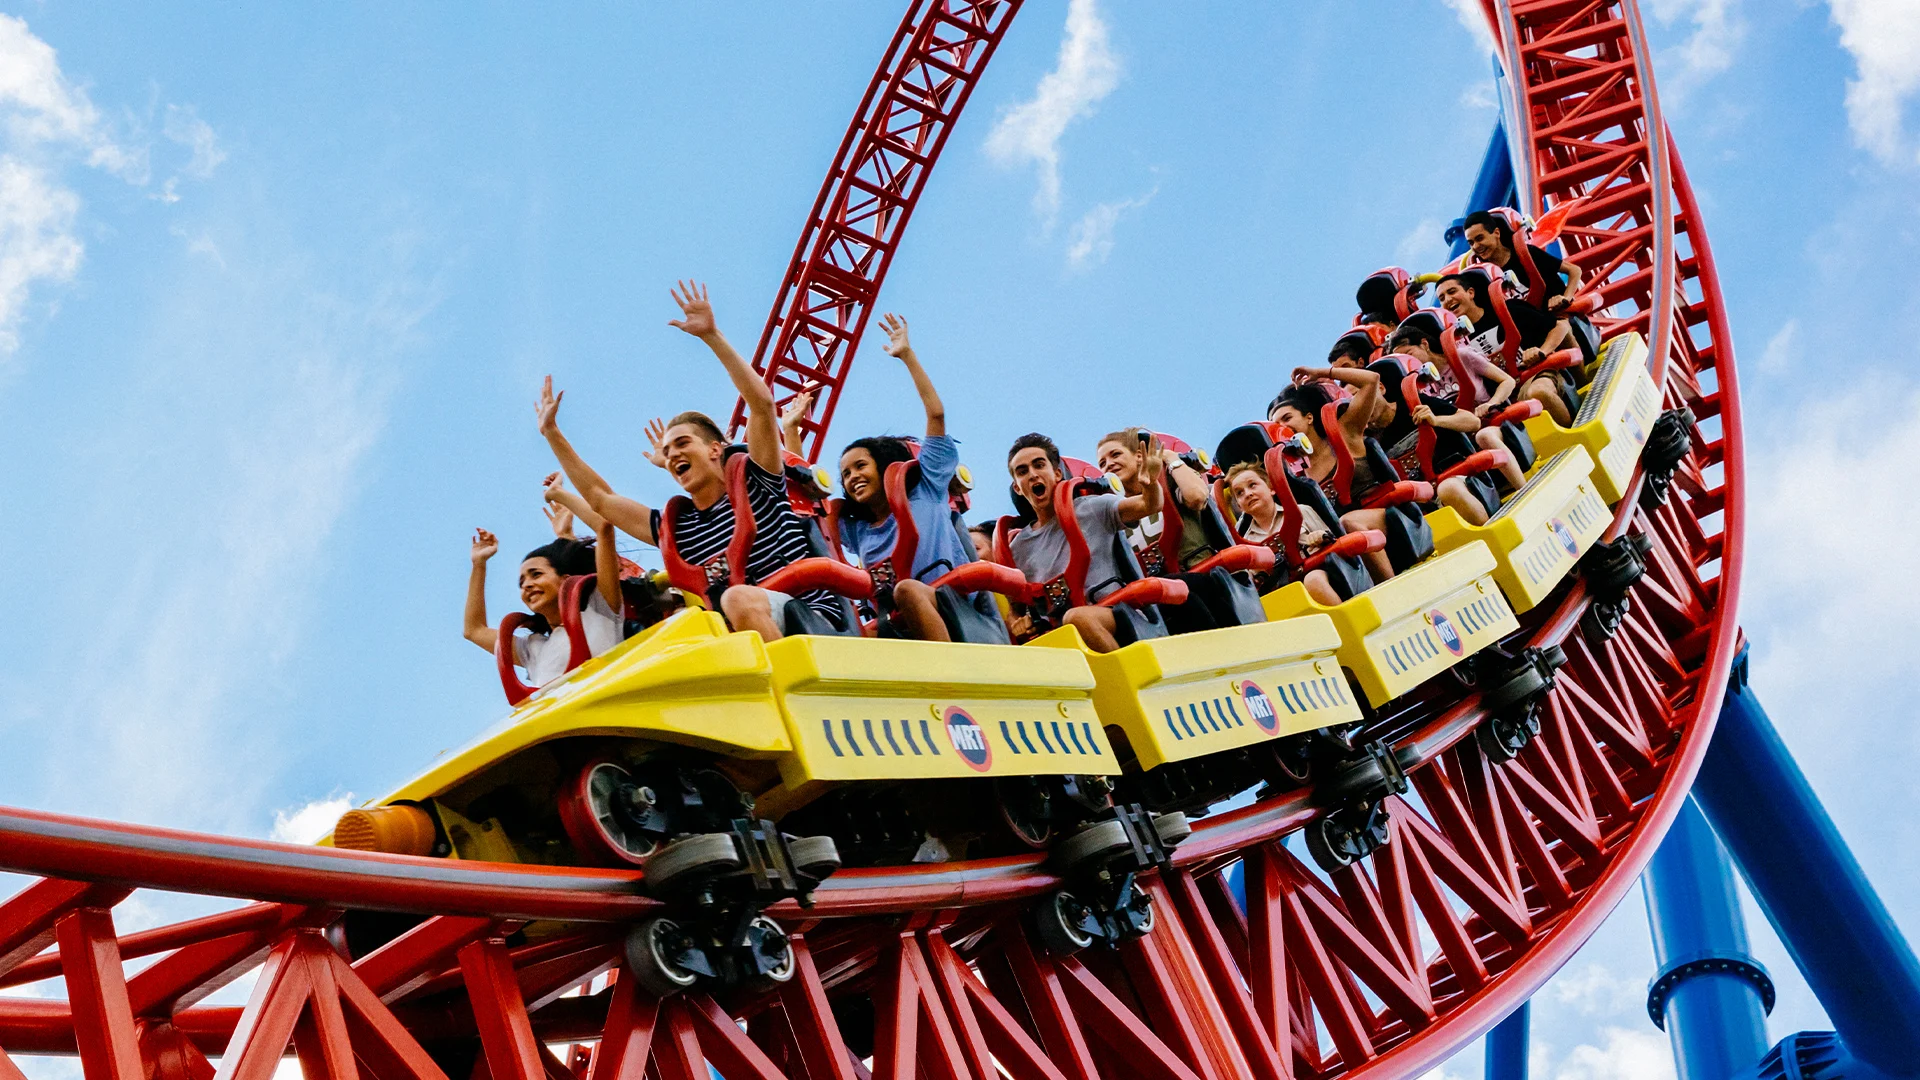 Excited riders experiencing the thrilling Superman Escape ride at Warner Bros. Movie World, with high-speed twists and turns against a backdrop of blue sky